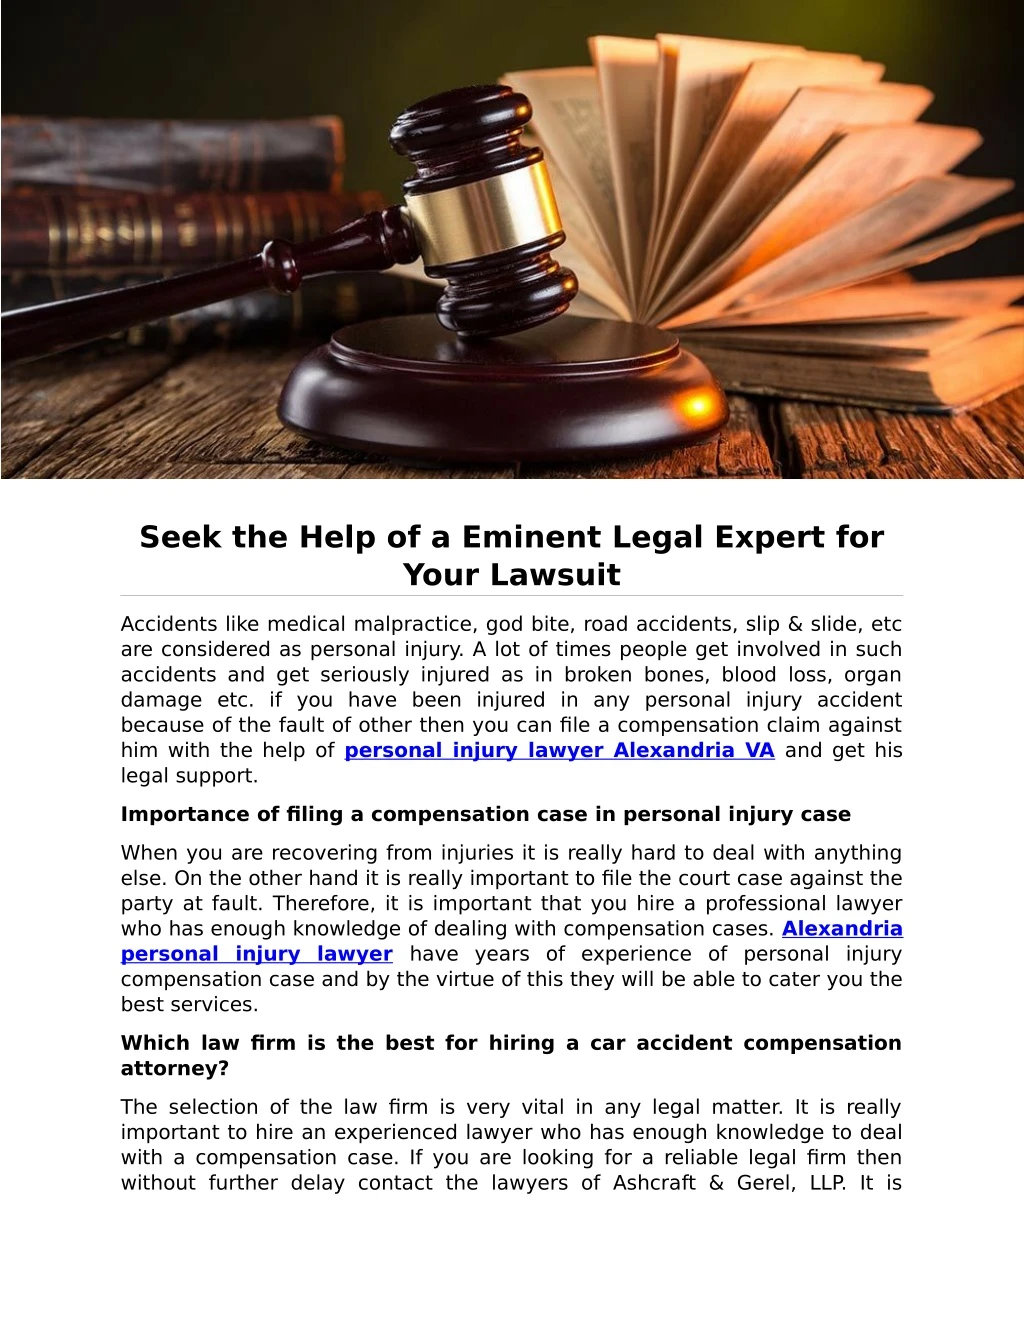 seek the help of a eminent legal expert for your